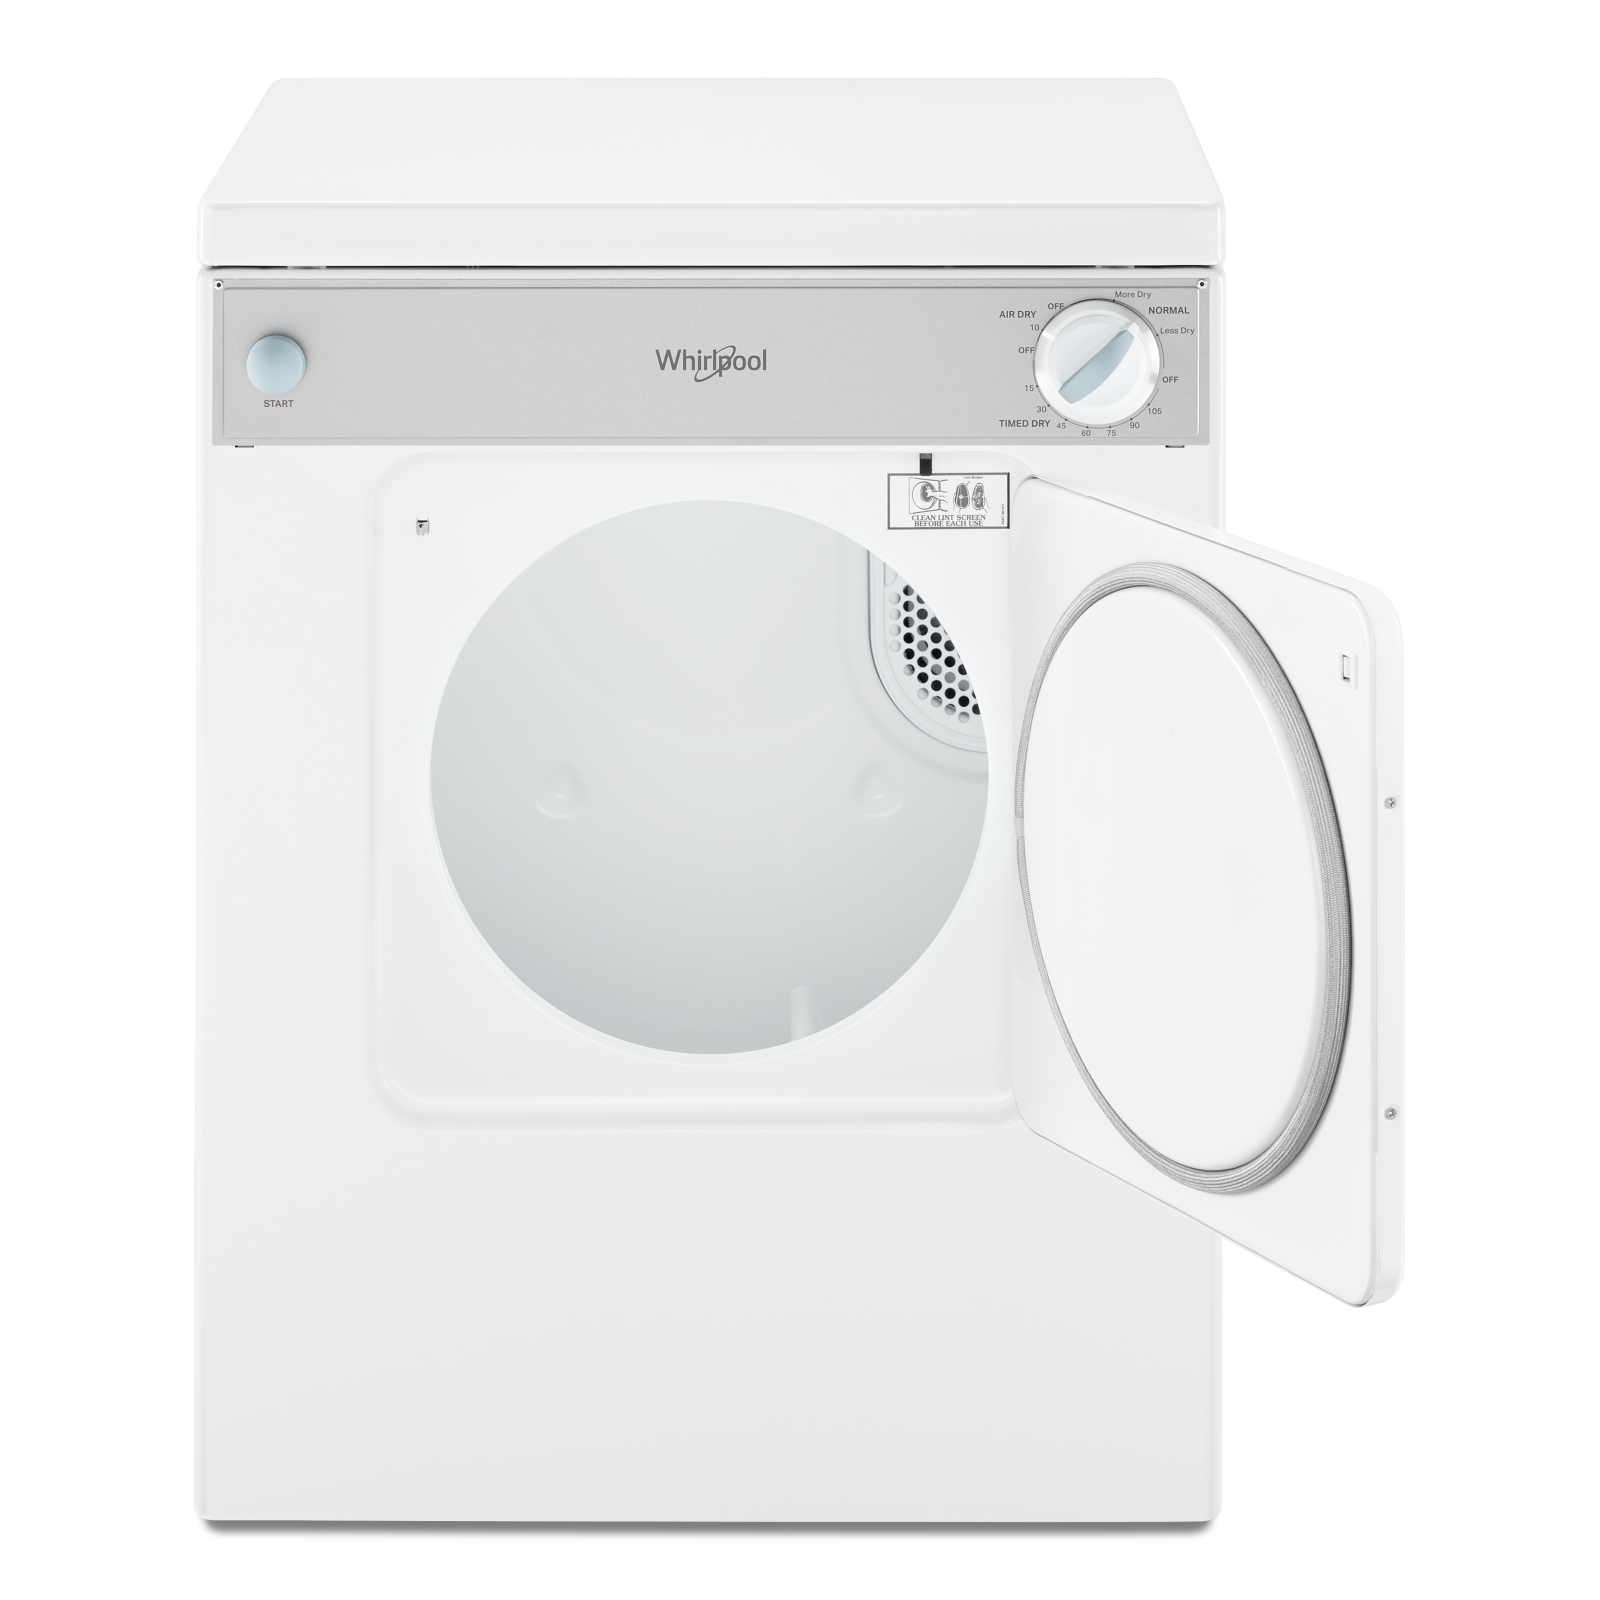 Whirlpool - 3.4 cu. Ft  Electric Dryer in White - LDR3822PQ